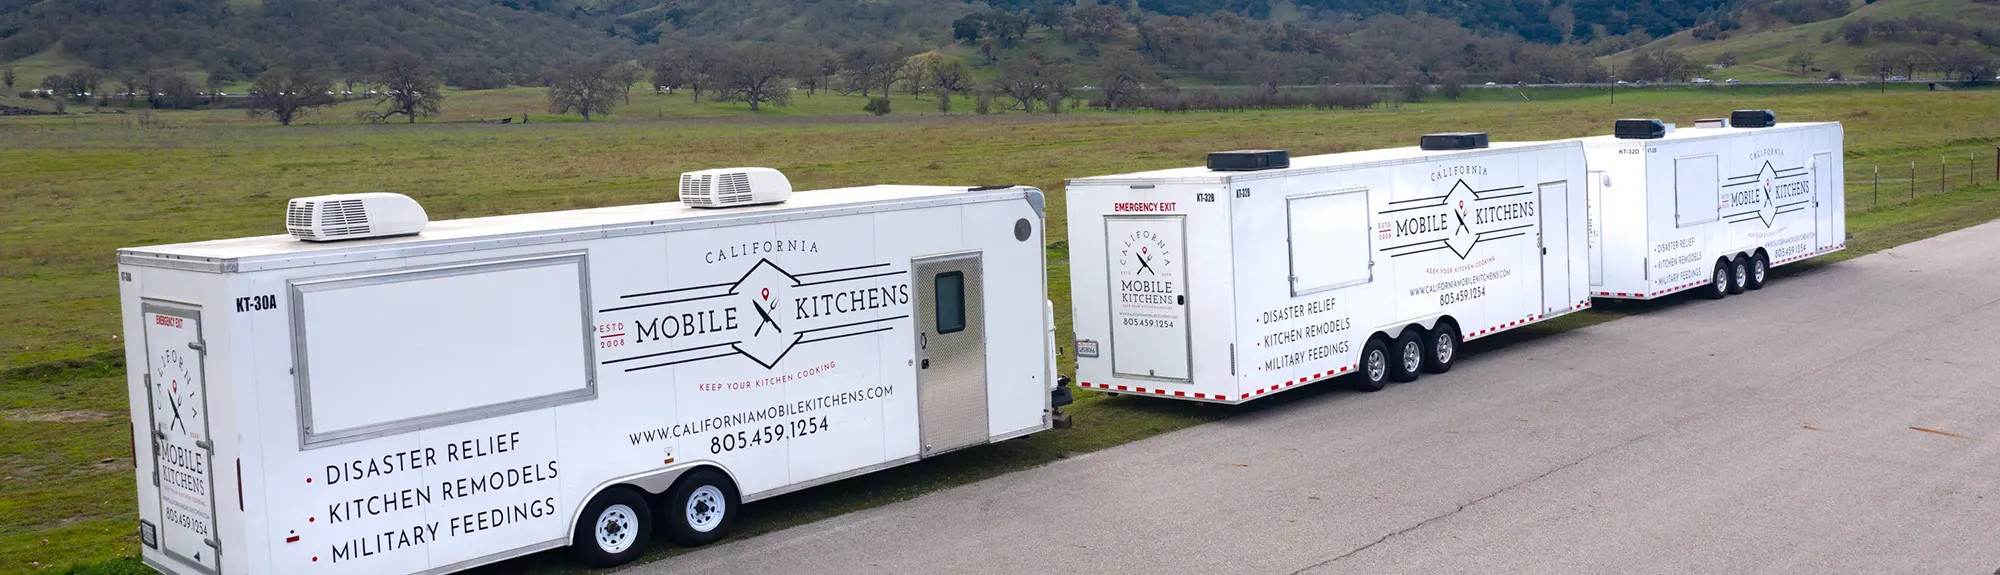 Mobile kitchens in Arizona are revolutionizing catering services